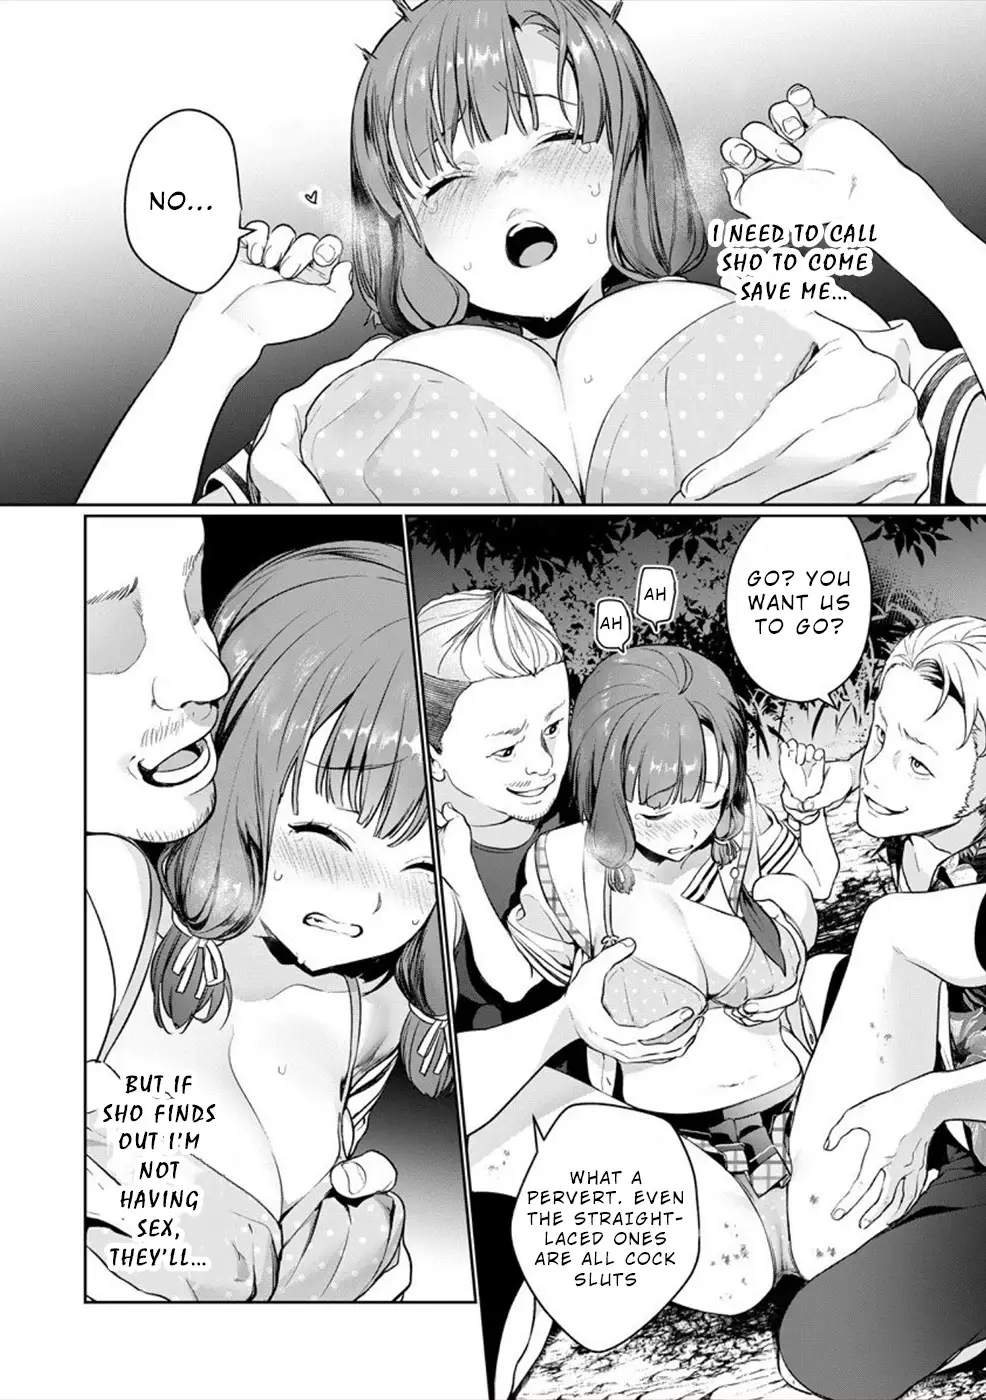 Nukita L - I Live On An Island Straight From A Fap Game, What On Earth Should I Do? - 1 page 50